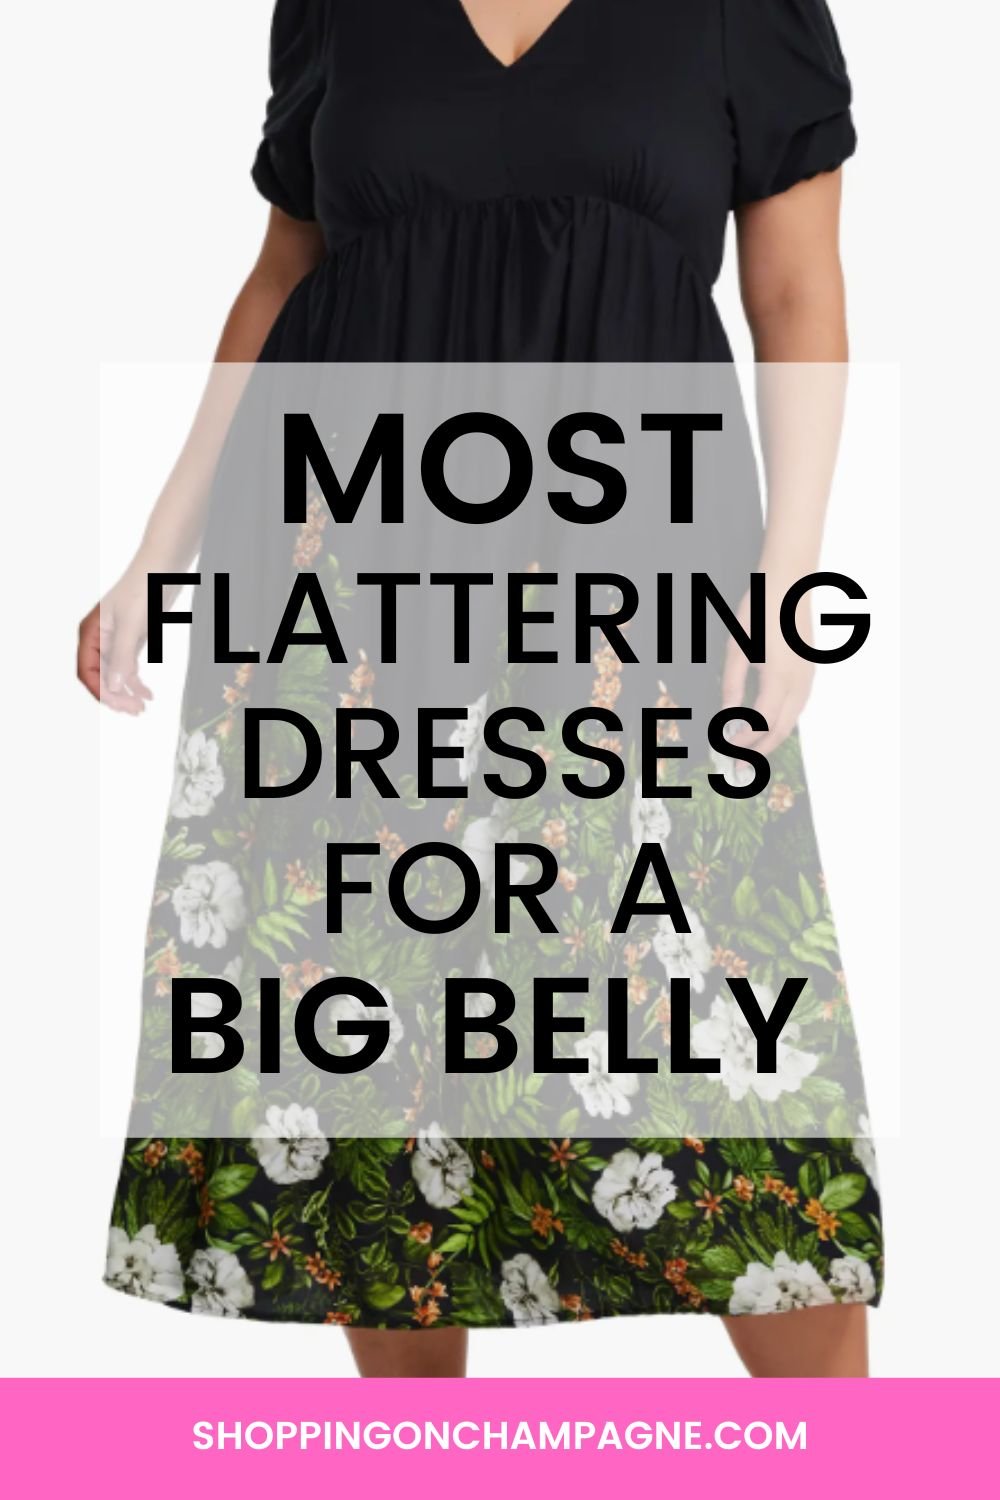 Flattering Dresses for a Big Belly — Shopping on Champagne, Nancy Queen